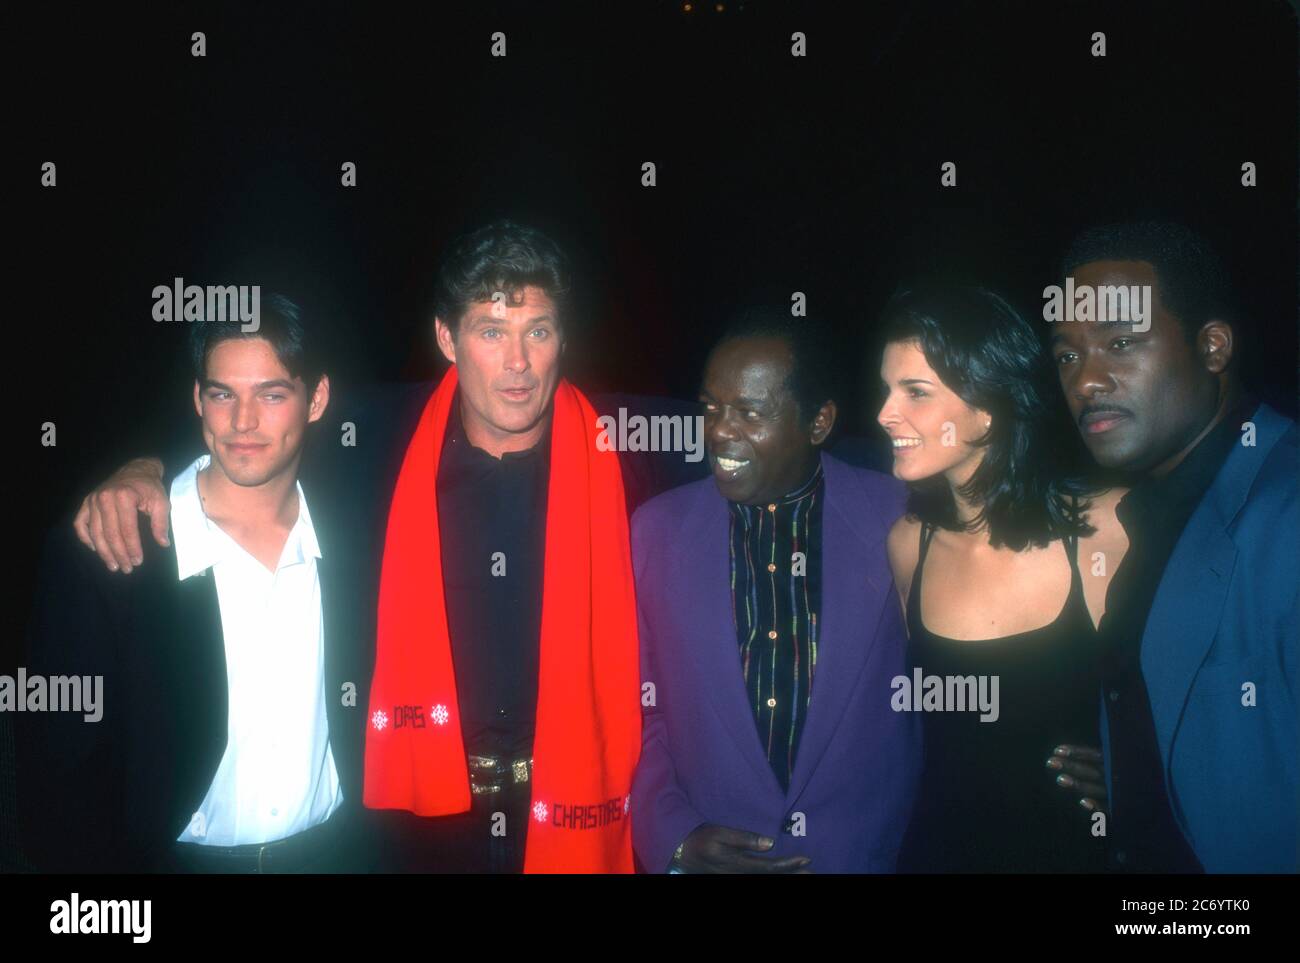 Universal City, California, USA 15th December 1995 (L-R) Actor Eddie Cibrian, actor David Hasselhoff, singer Lou Rawls, actress Angie Harmon and actor Gregory Alan Williams attend Baywatch & Baywatch Nights Holiday Party on December 15, 1995 at B.B. King's Blues Club in Universal City, California, USA. Photo by Barry King/Alamy Stock Photo Stock Photo